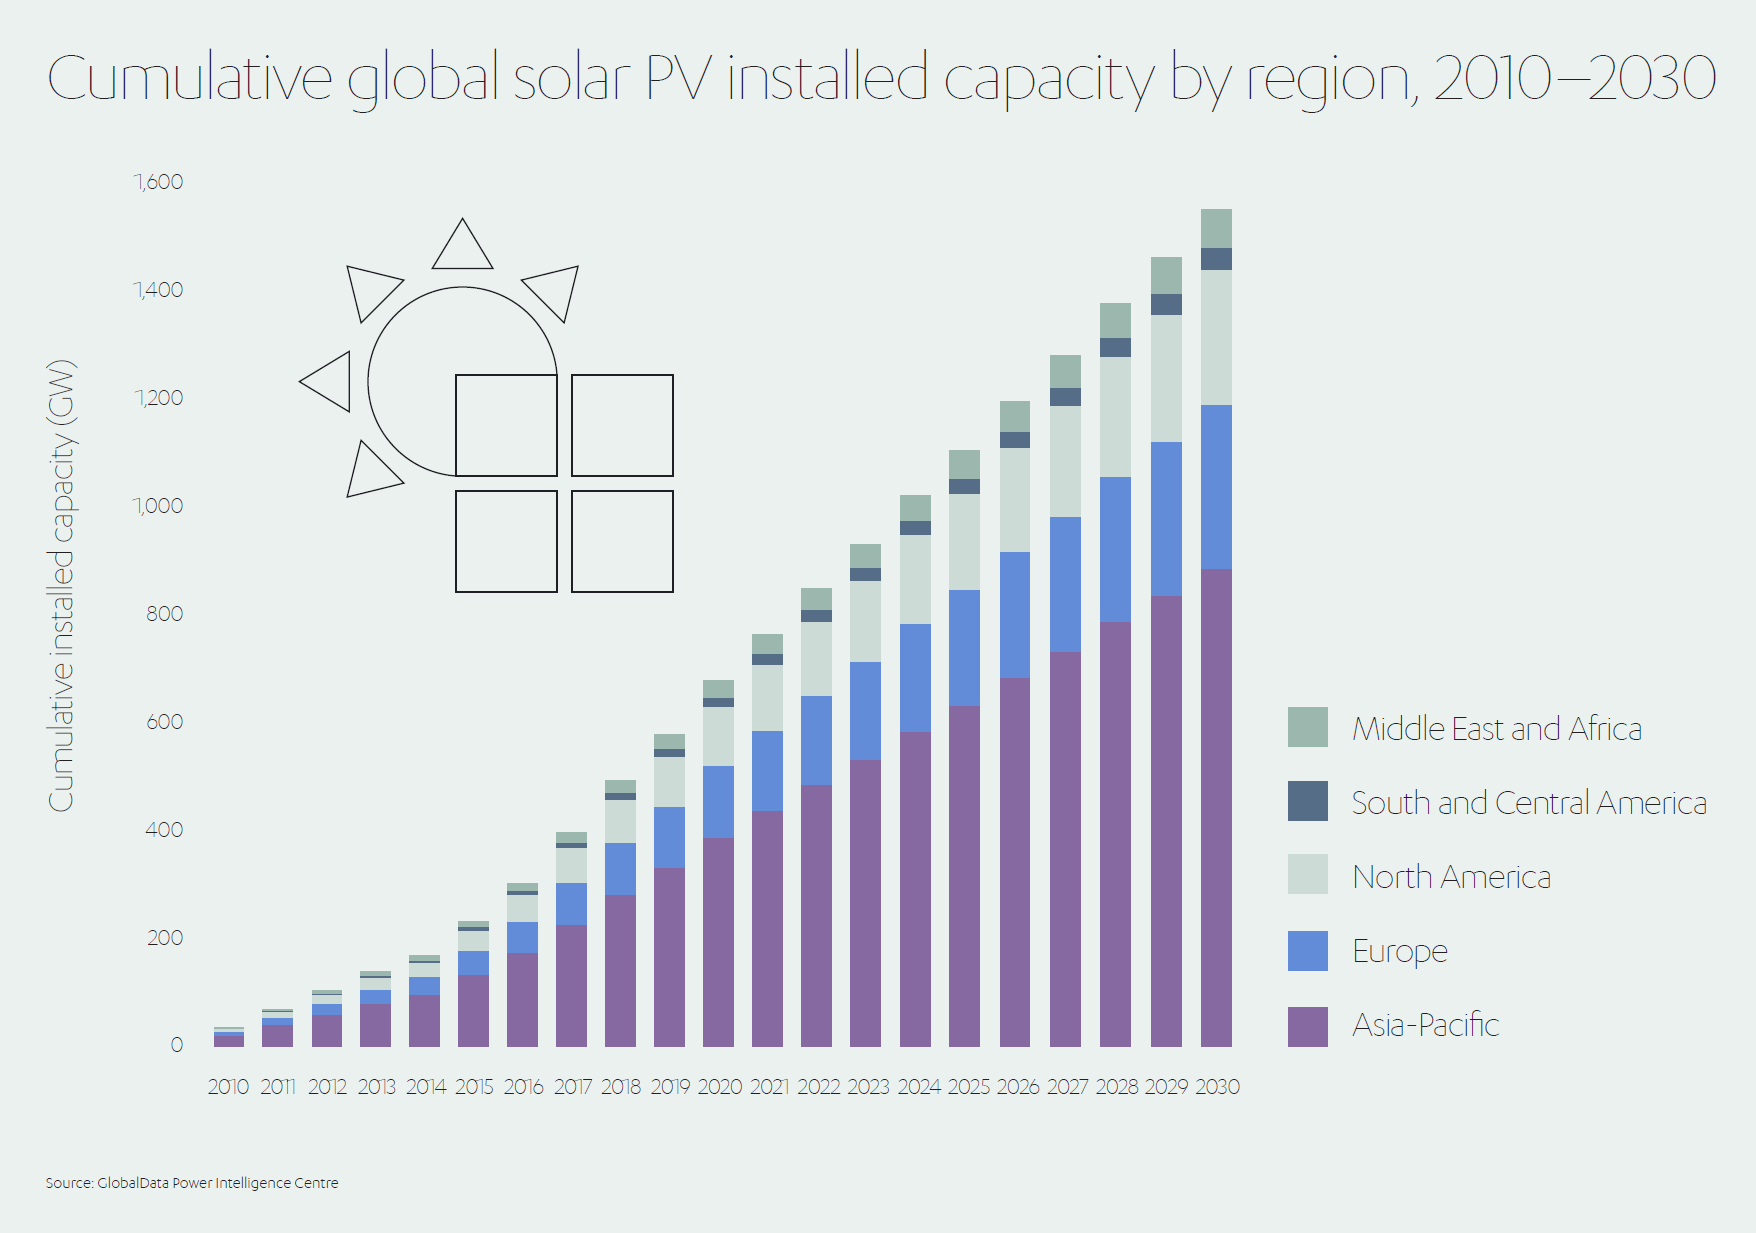 Global Solar PV Installed Capacity by Region from 2010-2030